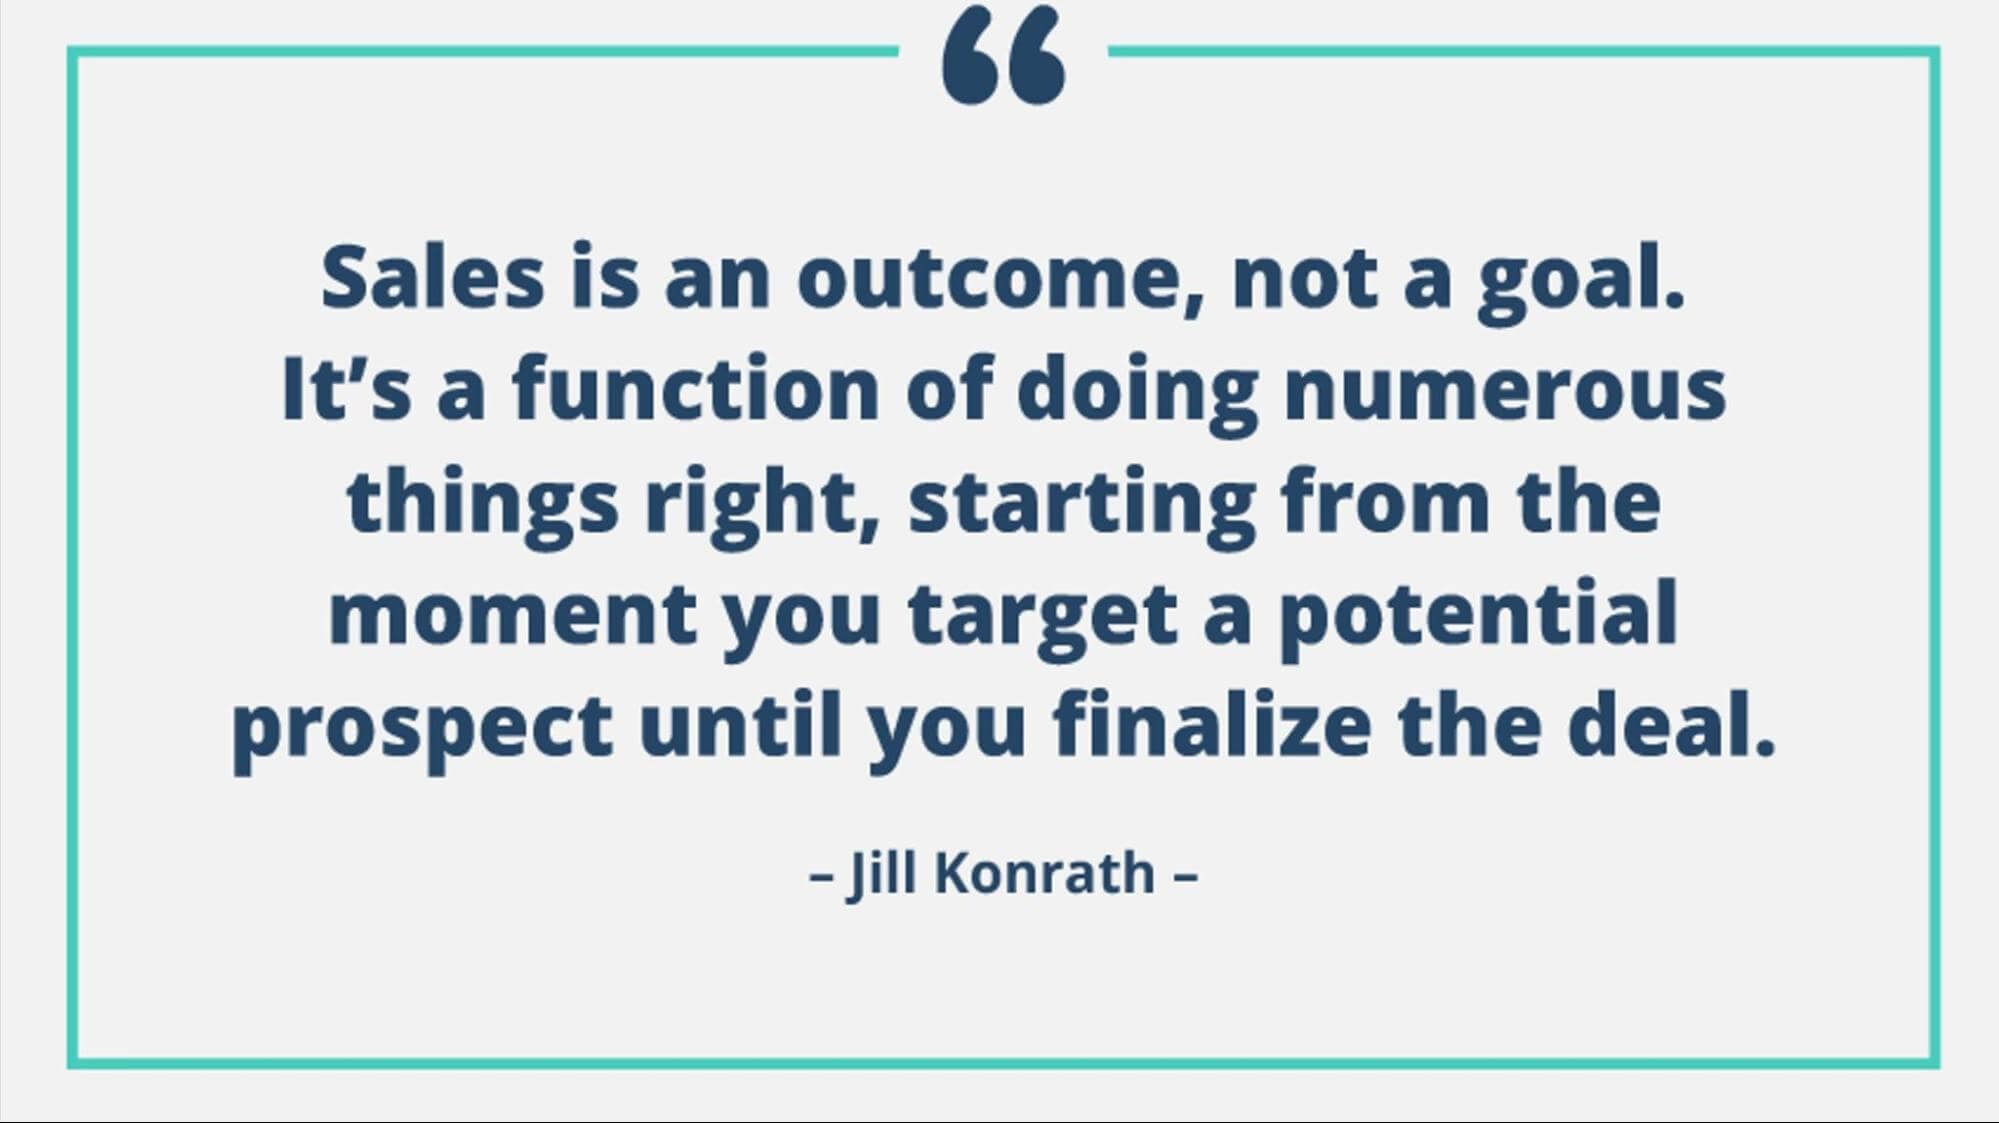 Sales is an outcome, not a goal. It's a function of doing numerous things right, starting from the moment you target a potential prospect until you finalize the deal. - Jill Konrath